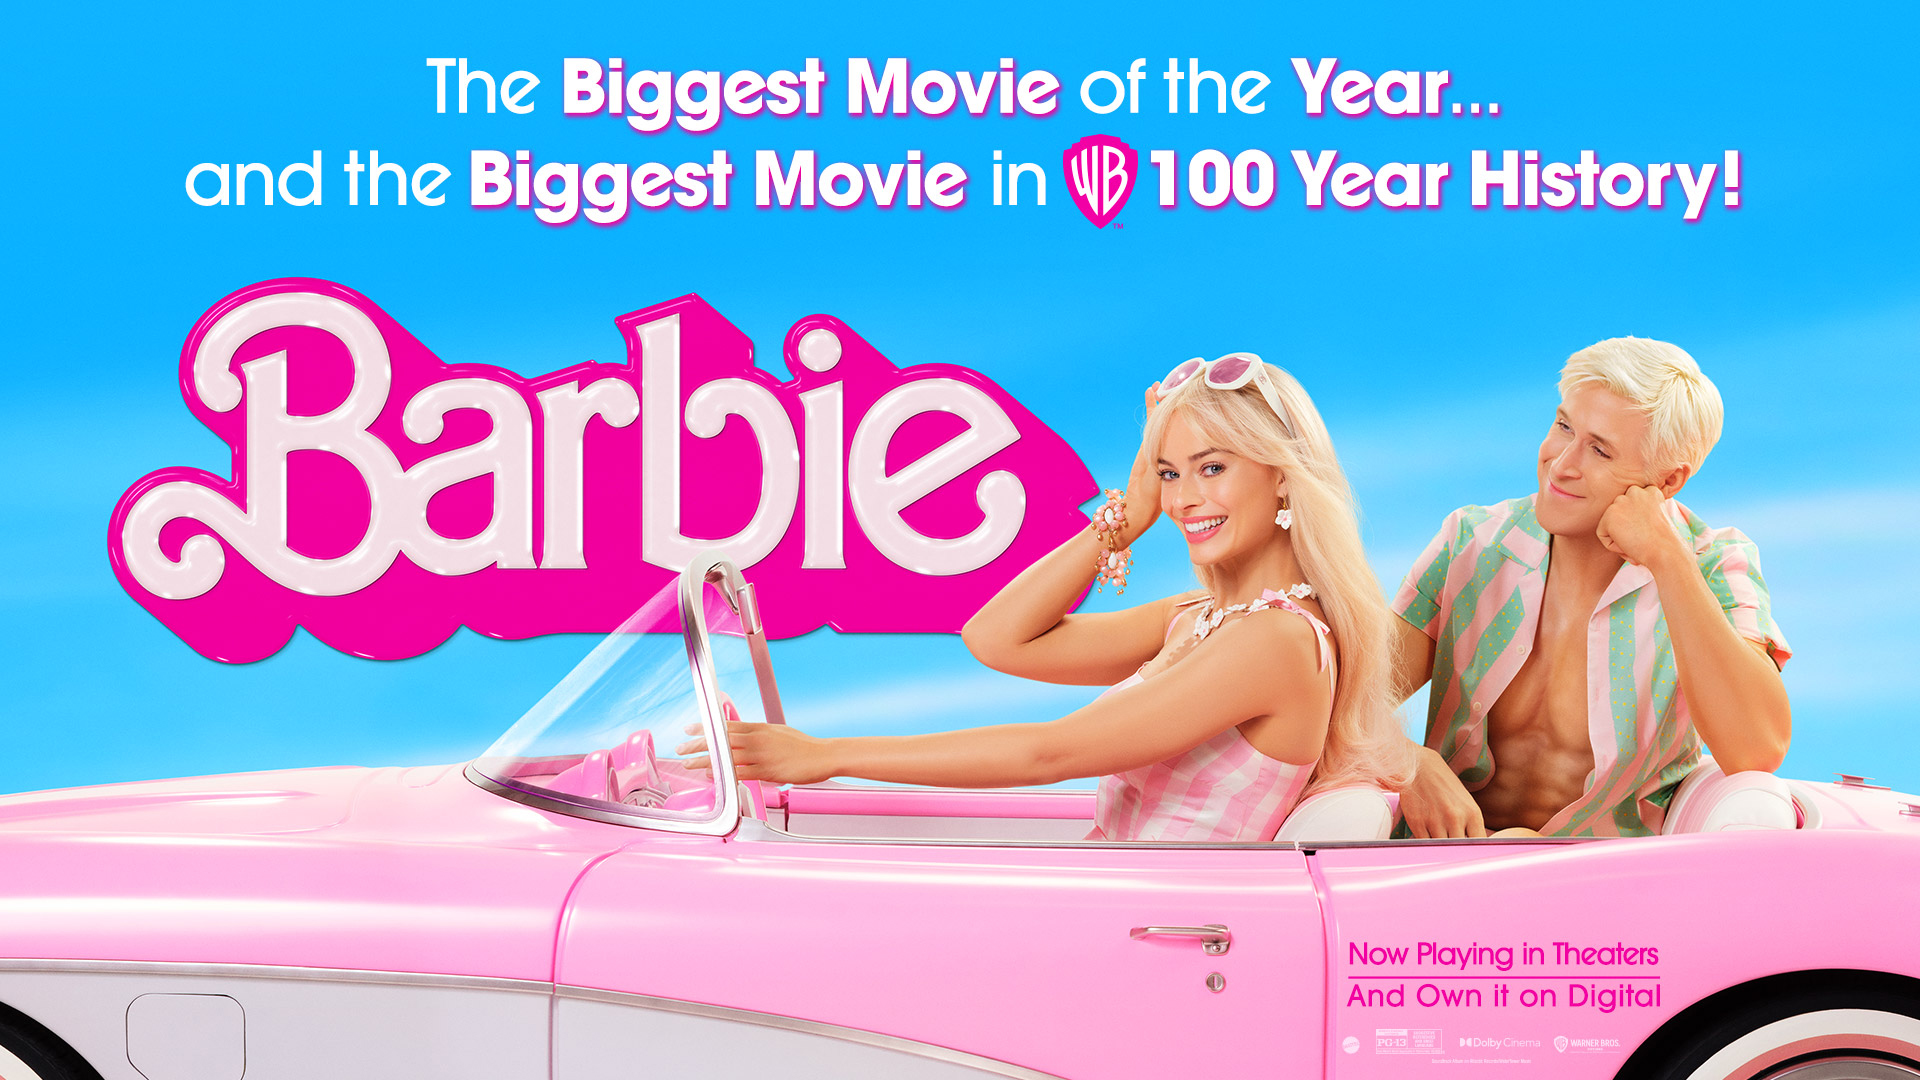 An image of the barbie film.